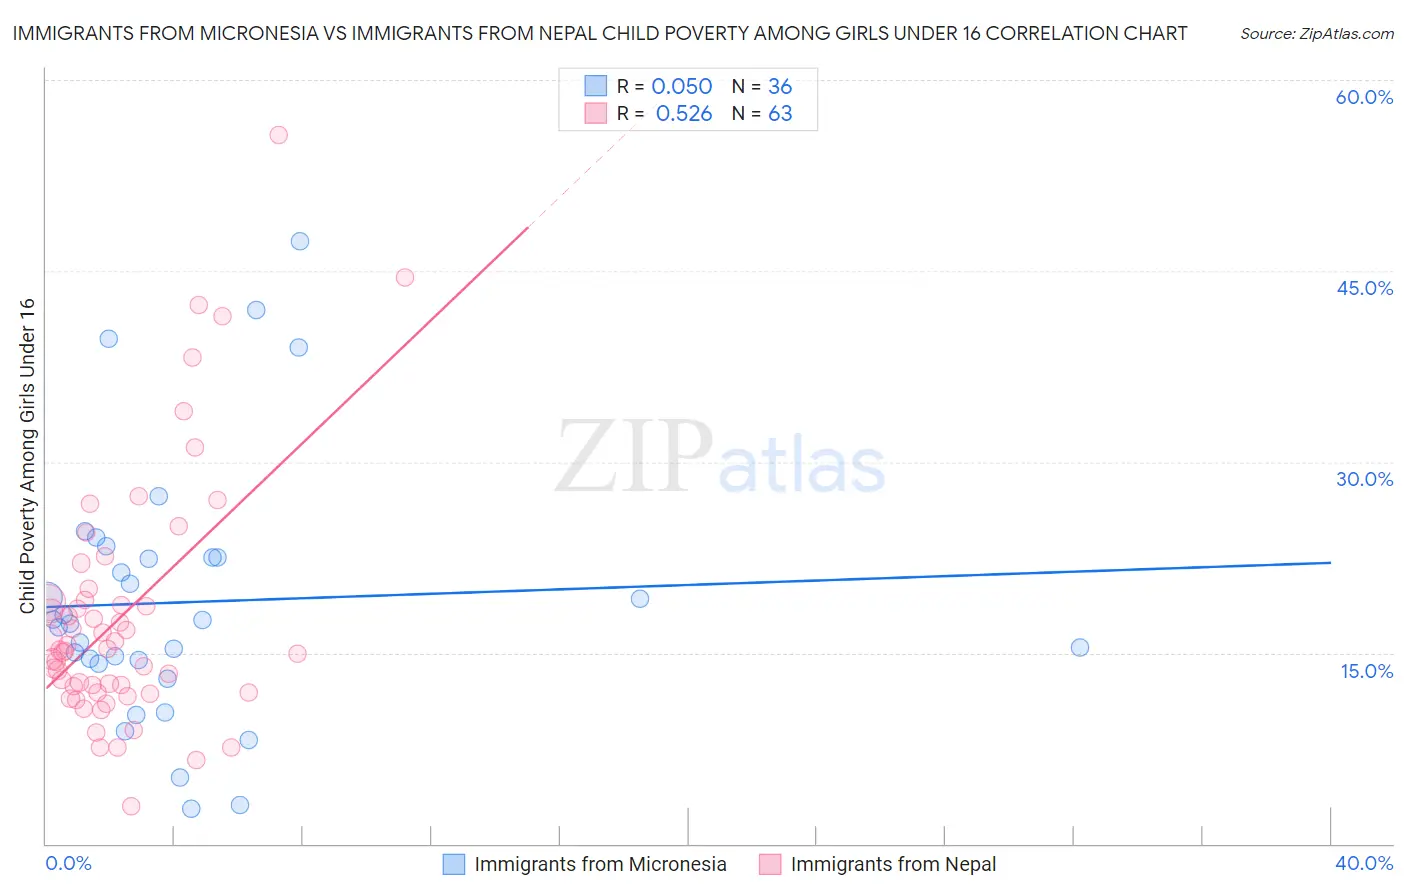 Immigrants from Micronesia vs Immigrants from Nepal Child Poverty Among Girls Under 16